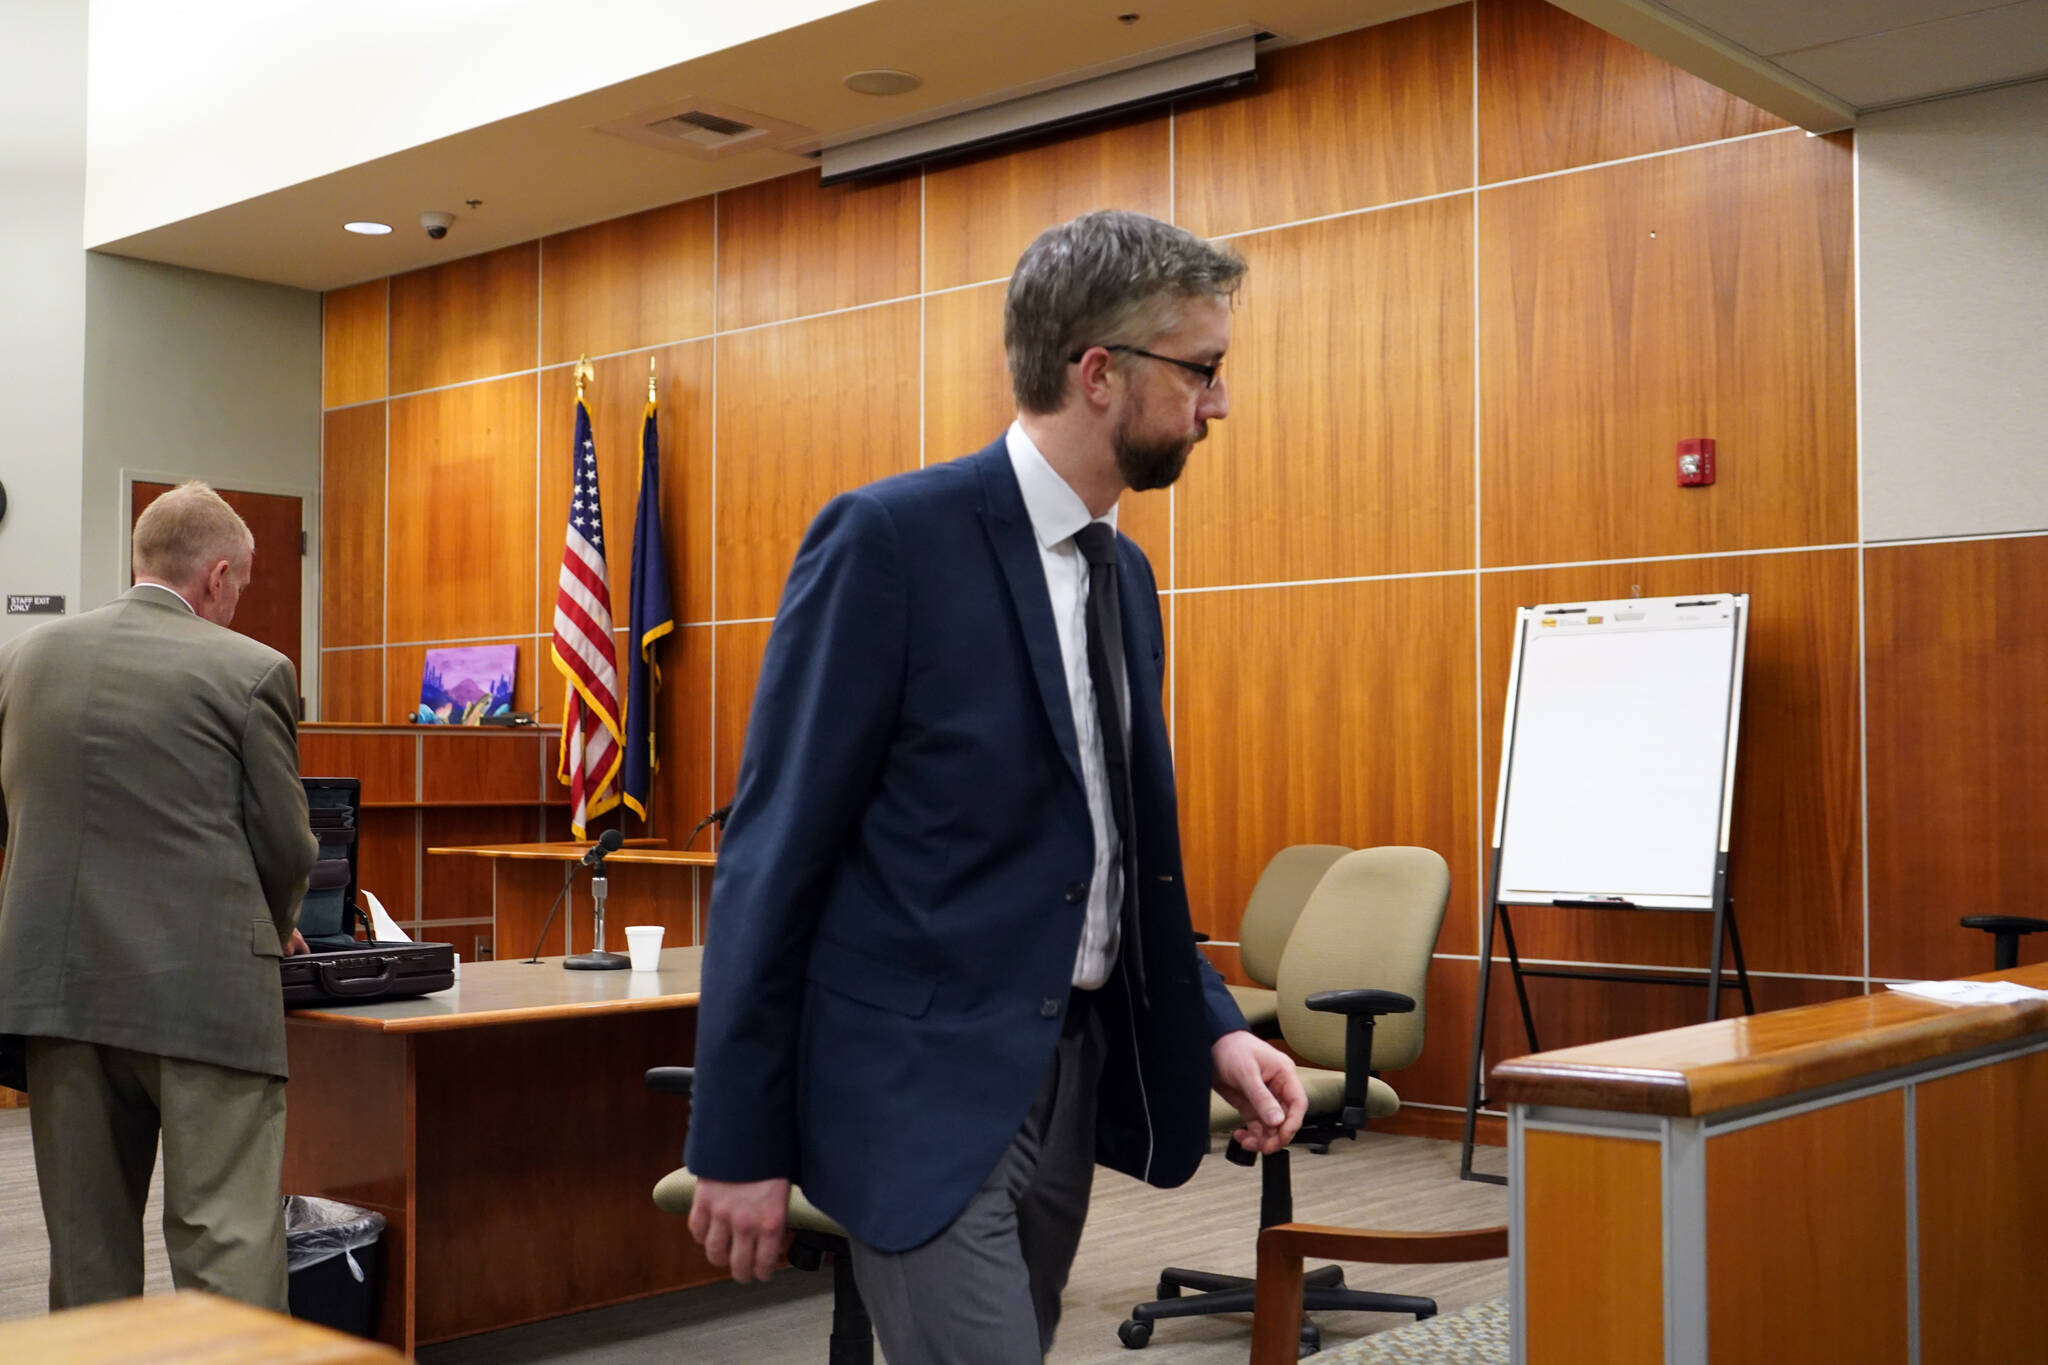 Nathan Erfurth, a former Soldotna High School teacher accused of sexually abusing one of his students, leaves the courtroom after submitting a not guilty plea at an arraignment hearing on Tuesday, July 11, 2023, at the Kenai Courthouse in Kenai, Alaska. (Jake Dye/Peninsula Clarion)